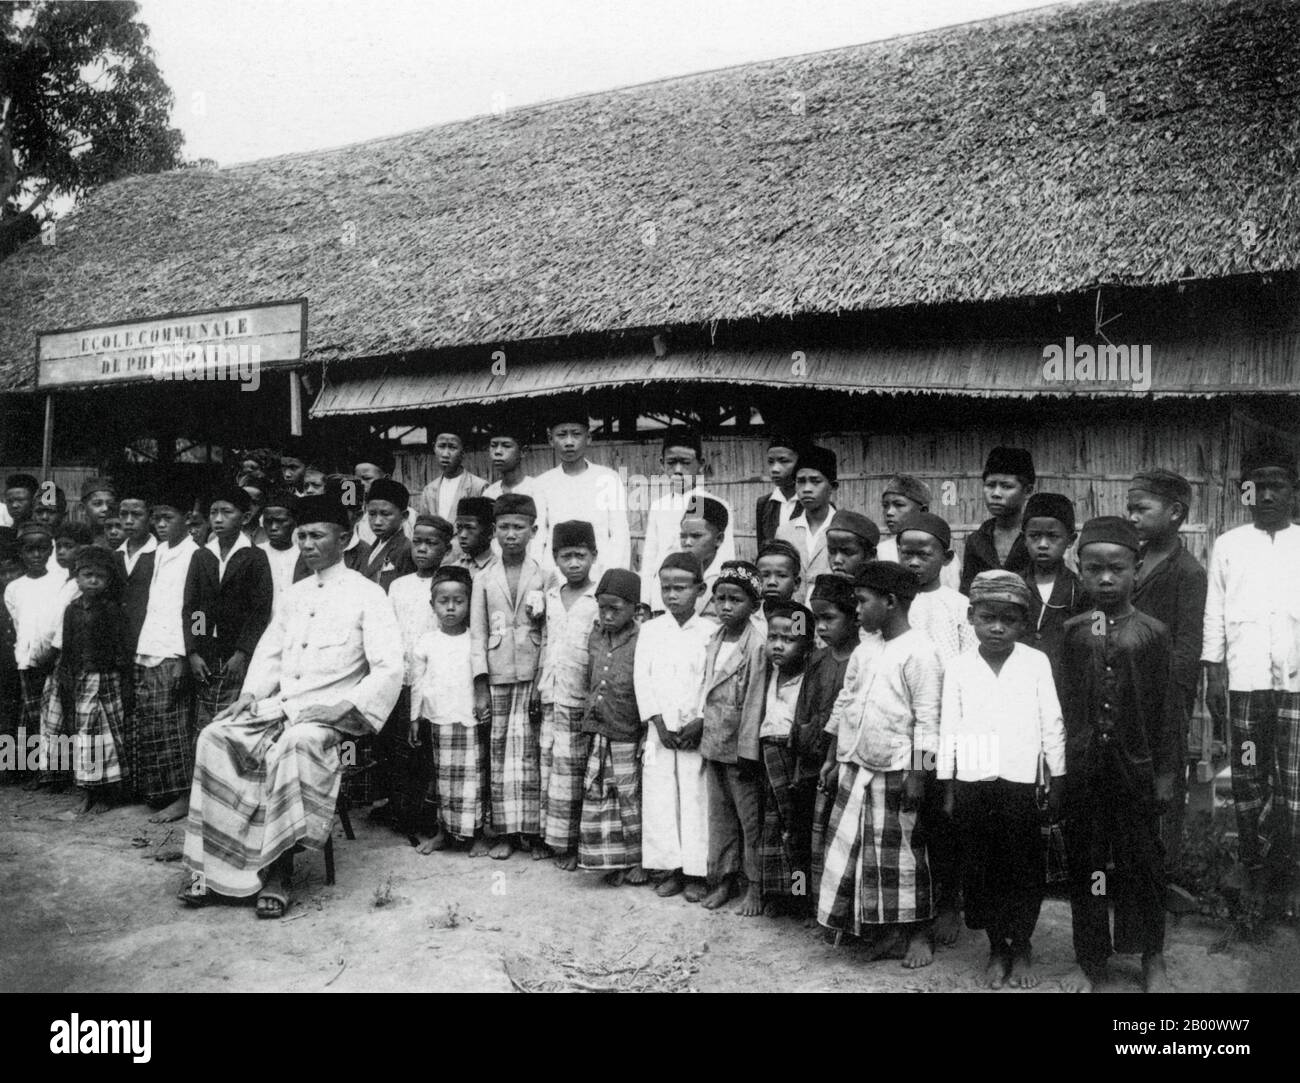 Vietnam: A 1918 photograph of a predominantly Cham-Malay Muslim primary school in the Chau Doc area of the Mekong delta, then part of Cochinchina.  Cochinchina is a region encompassing the southern third of Vietnam including Saigon/Ho Chi Minh City and was a French colony from 1862 to 1948. The later state of South Vietnam was created in 1954 by combining Cochinchina with southern Annam. The Cham people are remnants of the Kingdom of Champa (7th to 15th centuries). They are nowadays concentrated between Kampong Cham Province in Cambodia and areas in central and southeastern Vietnam. Stock Photo